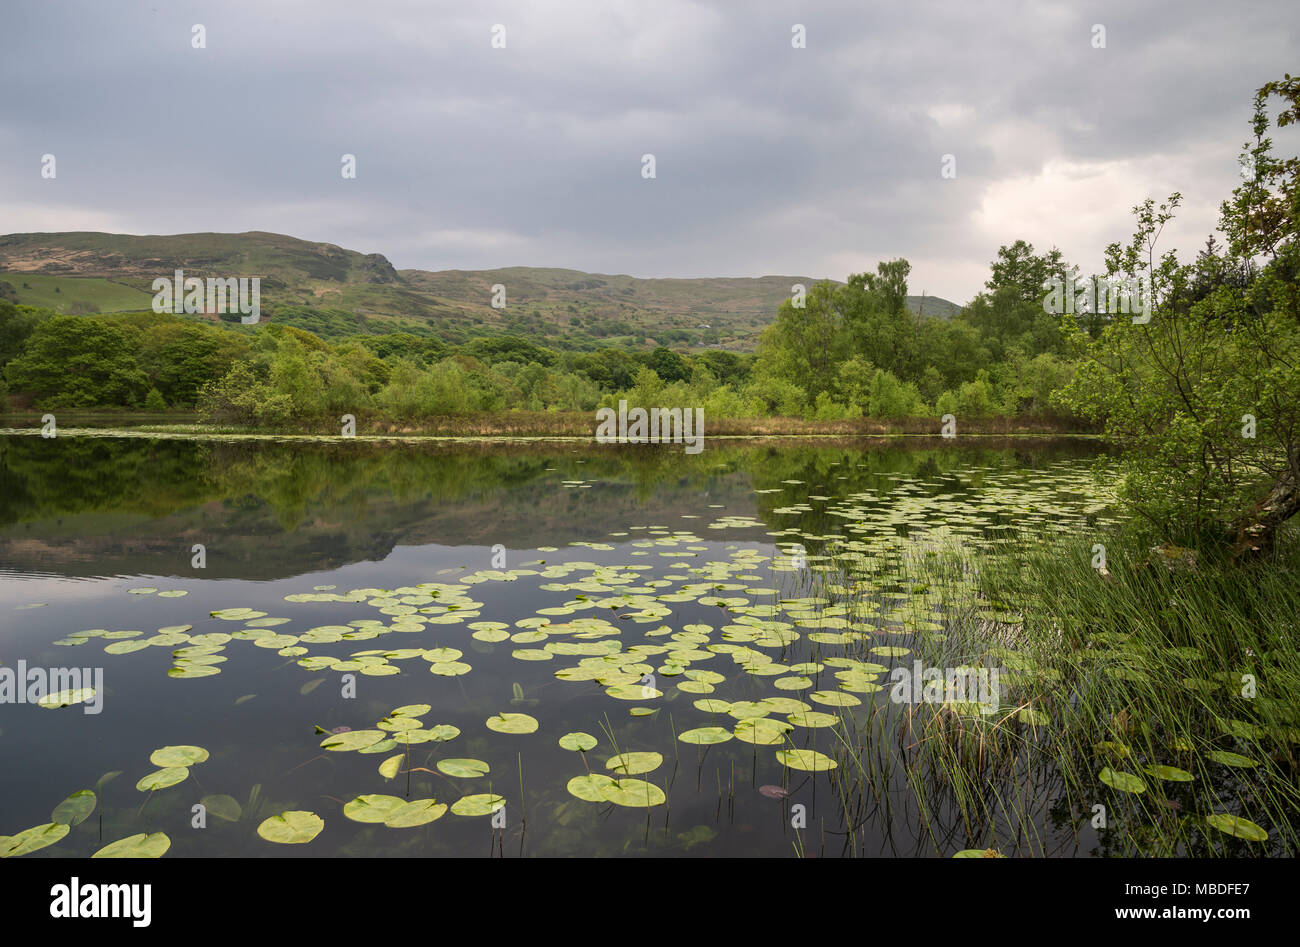 Llyn Tecwyn Isaf, a beautiful natural lake in the hills of Snowdonia, North Wales, UK. Water lilies on the calm water. Stock Photo